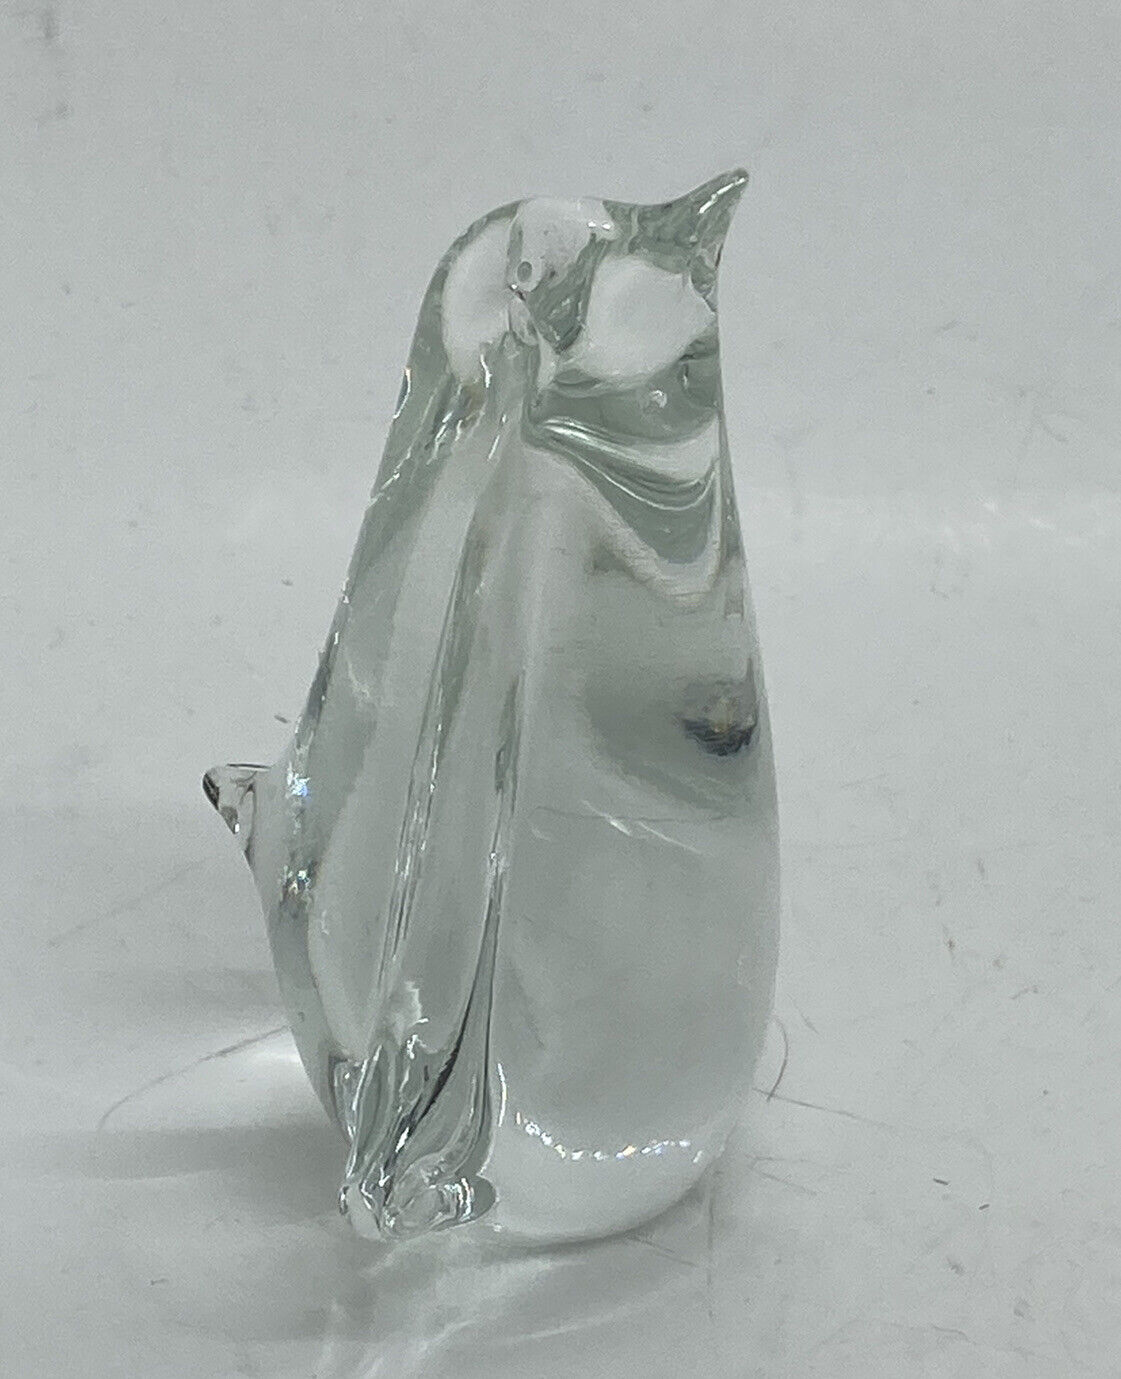 Vintage 1980s Baby Penguin Crystal Glass Paperweight 3” Tabletop Art Decor 23